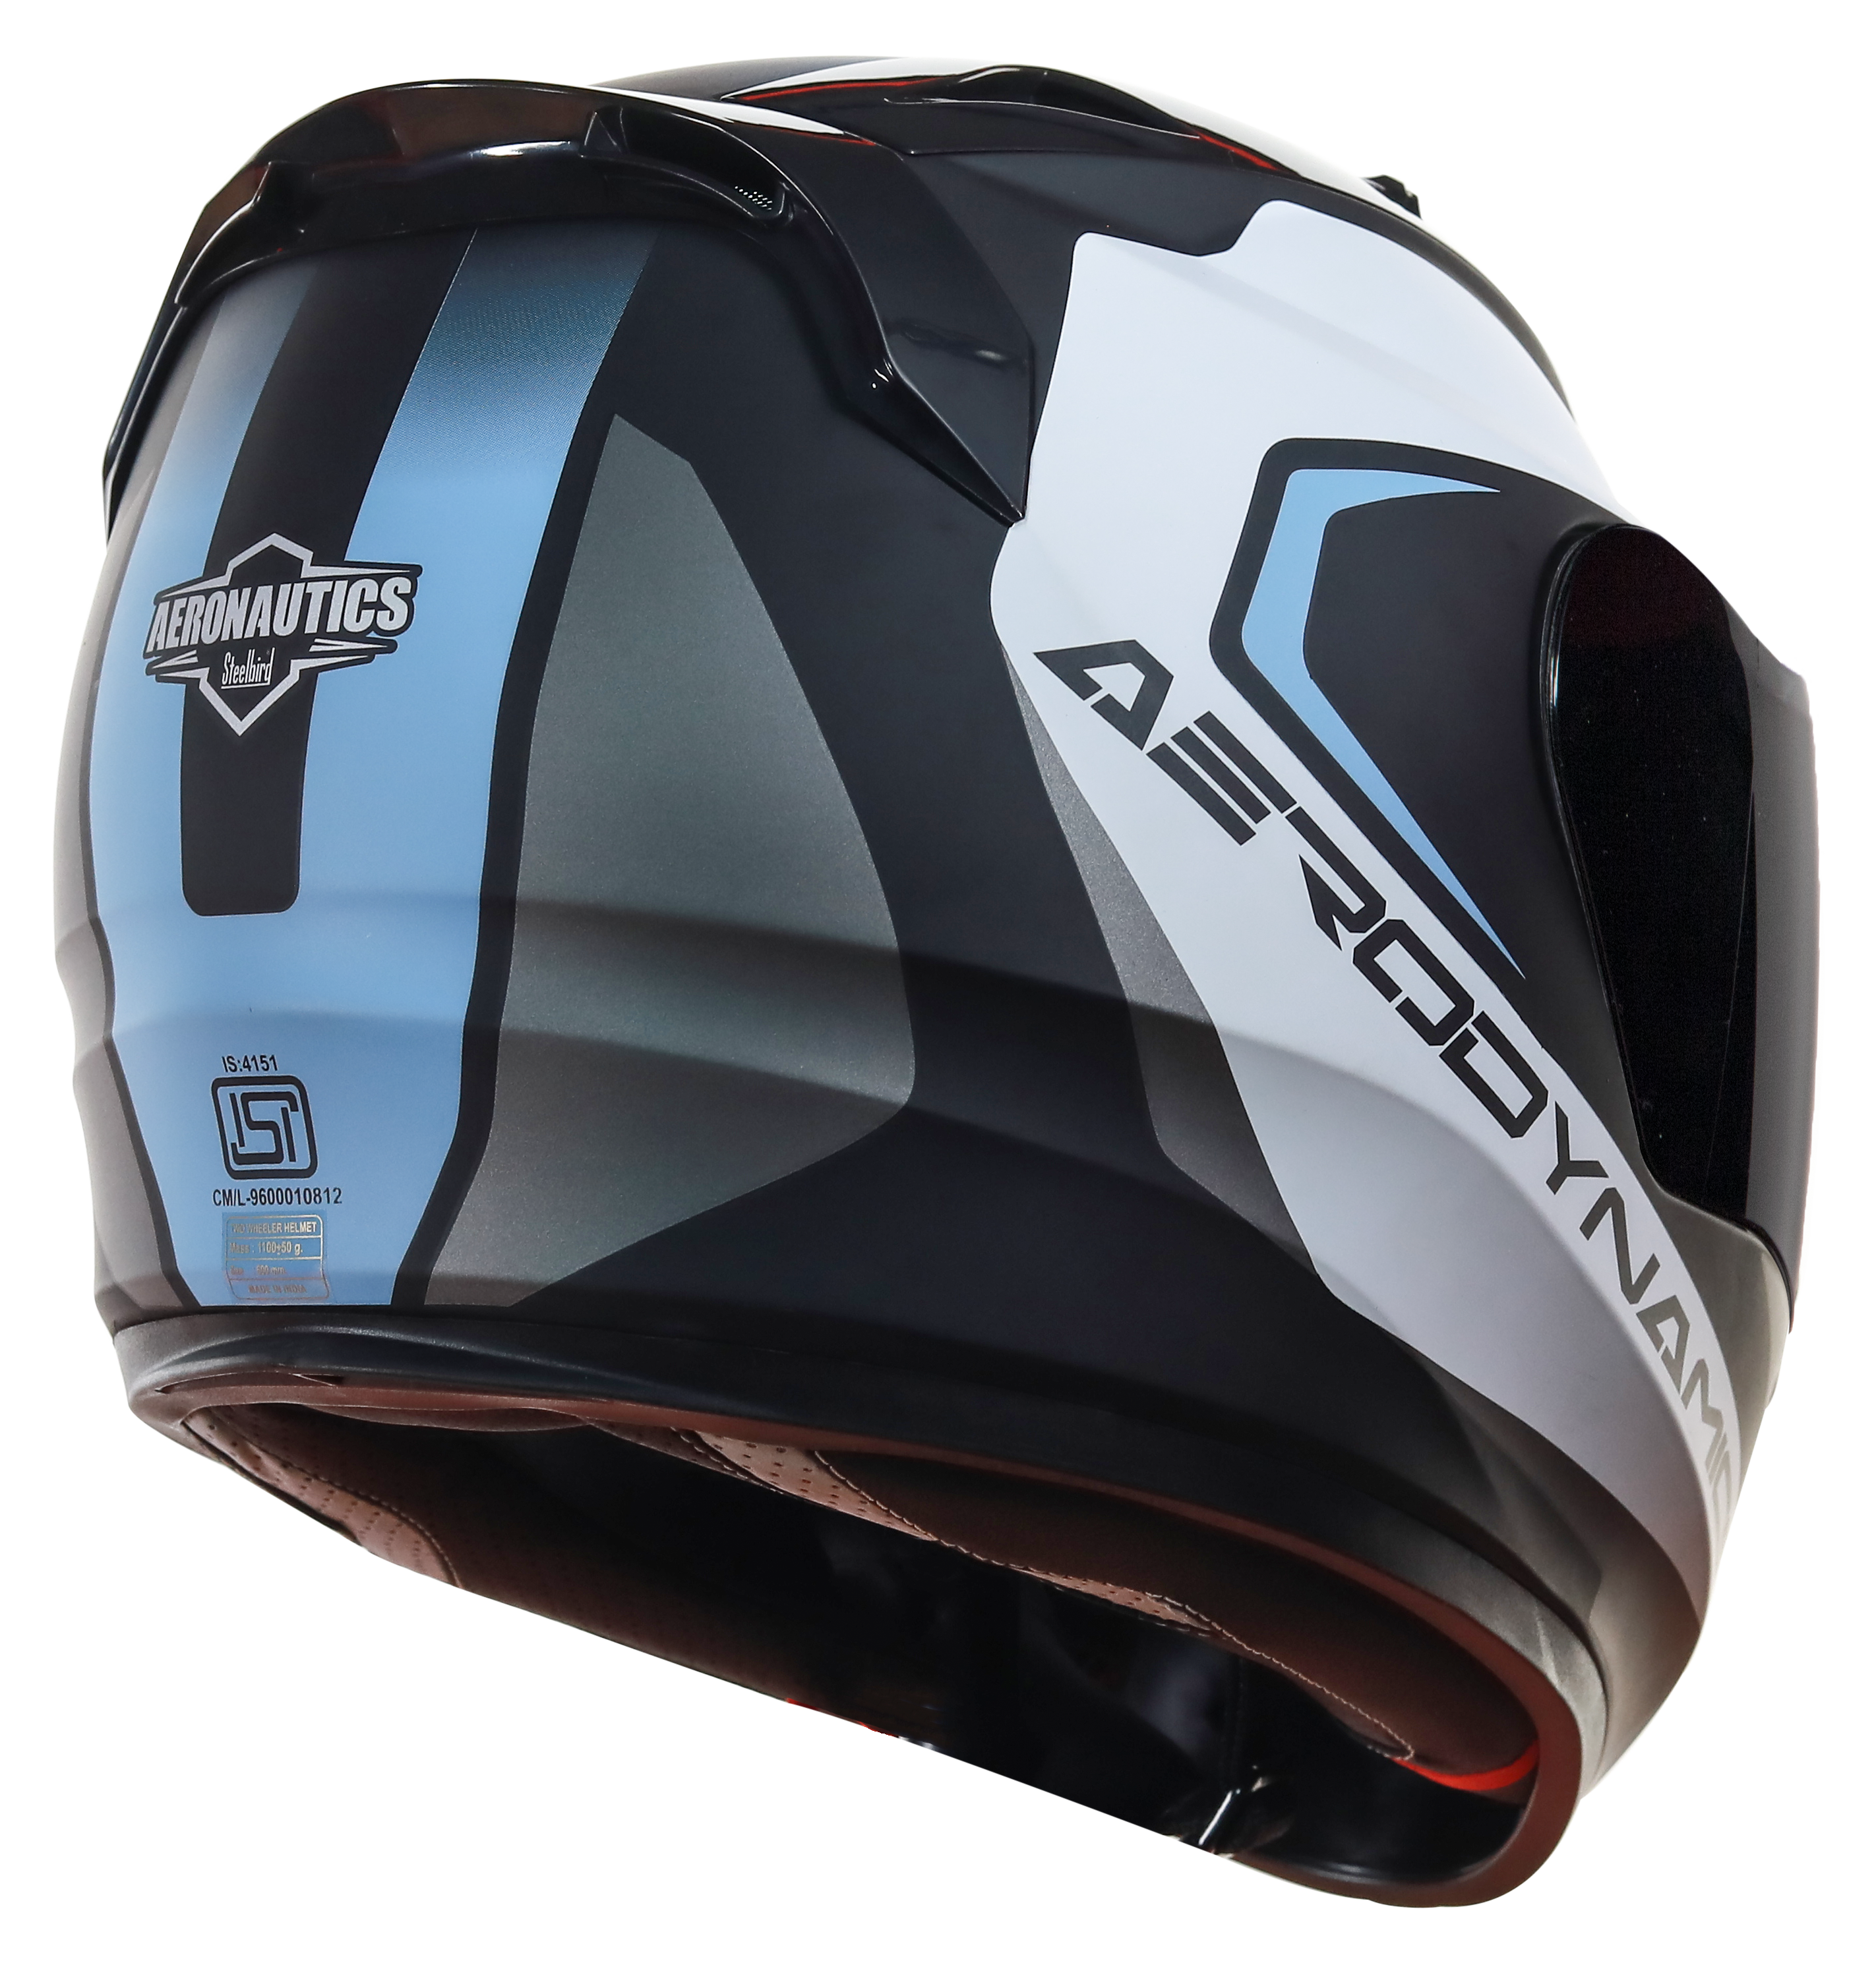 SA-1 Aerodynamics Mat Black With Light Blue (Fitted With Clear Visor Extra Gold Chrome Visor Free)